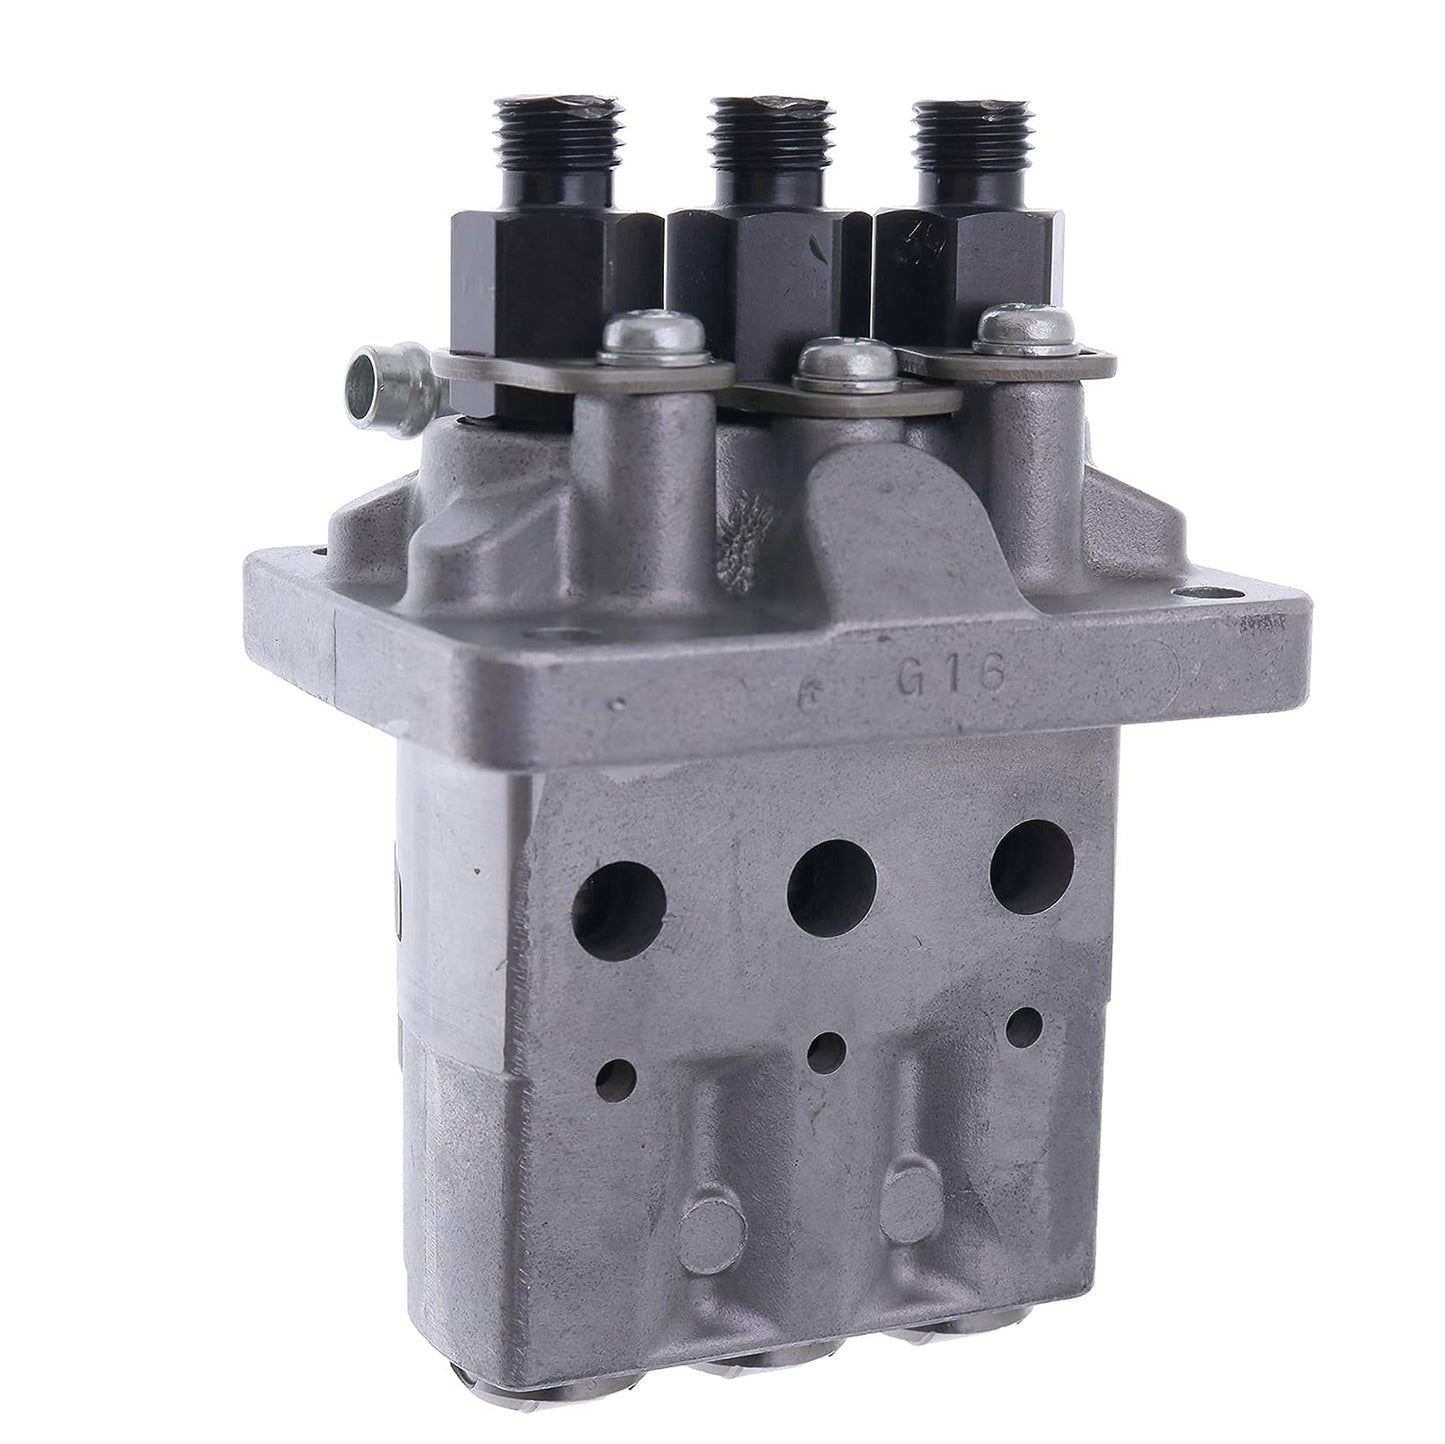 094500-8120 Fuel Systems Injection Pump Compatible With Denso Perkins 403D-11 403C-11 Engine